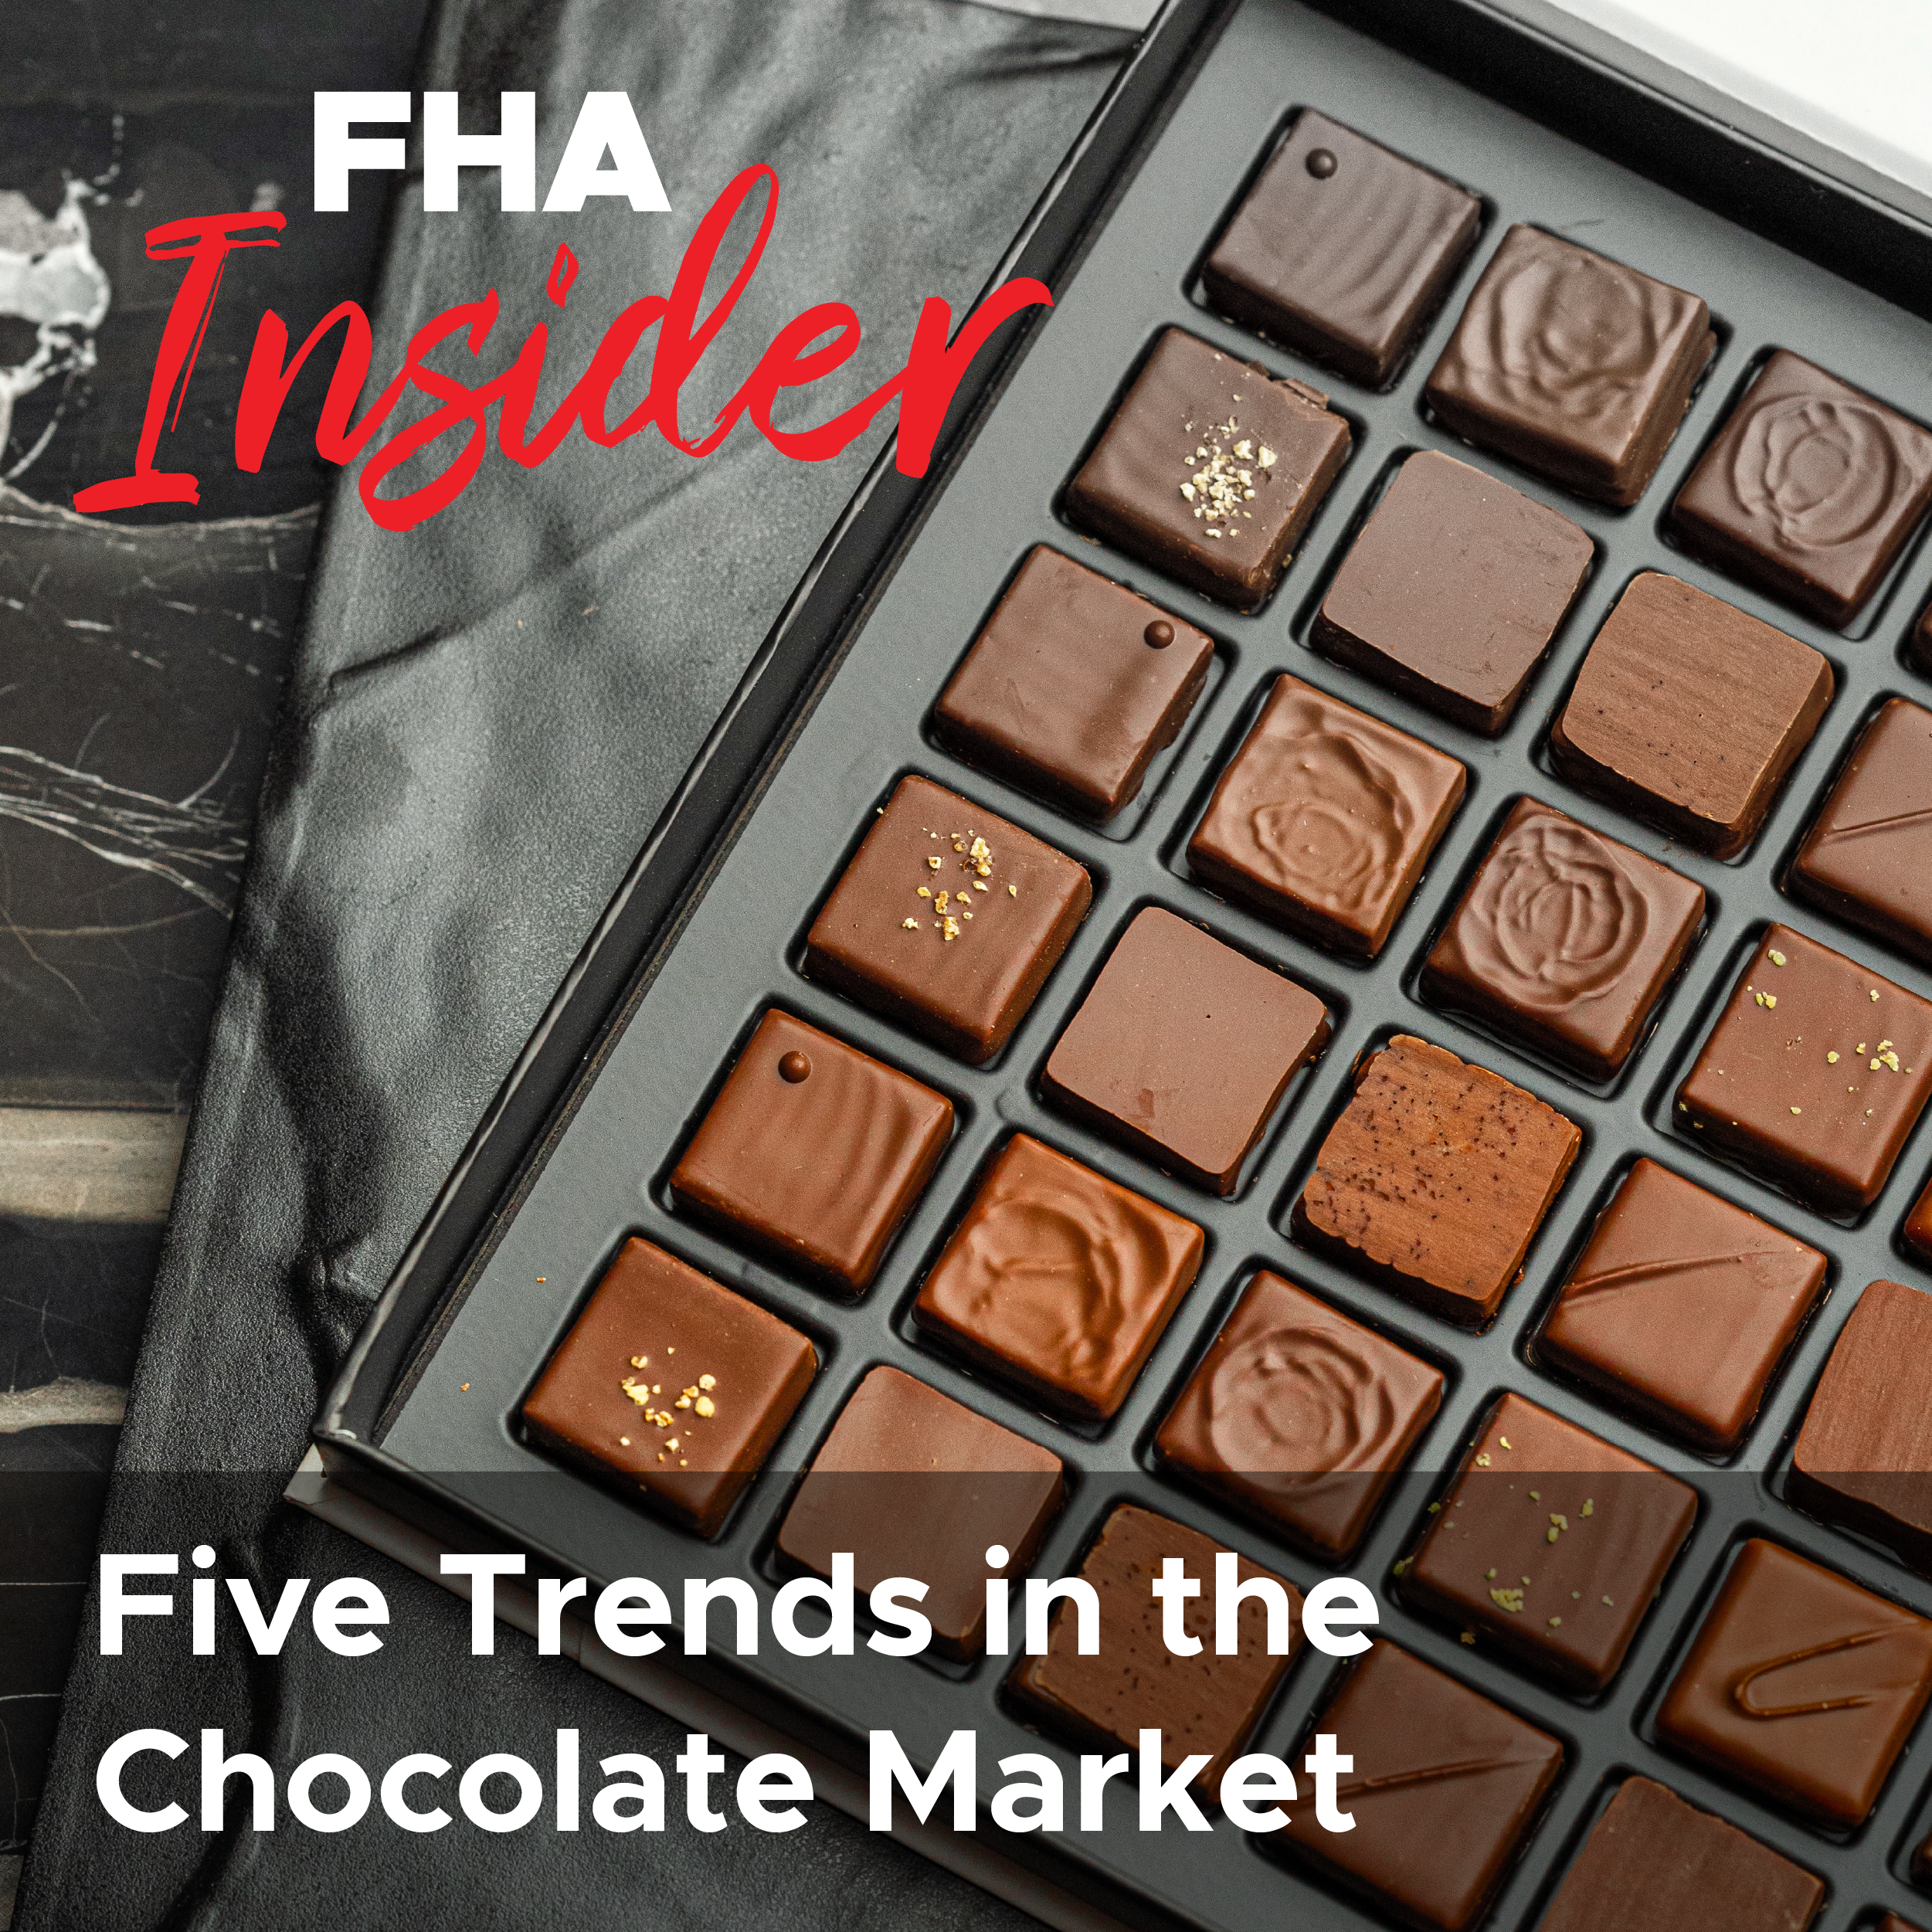 5 trends in the Chocolate Market